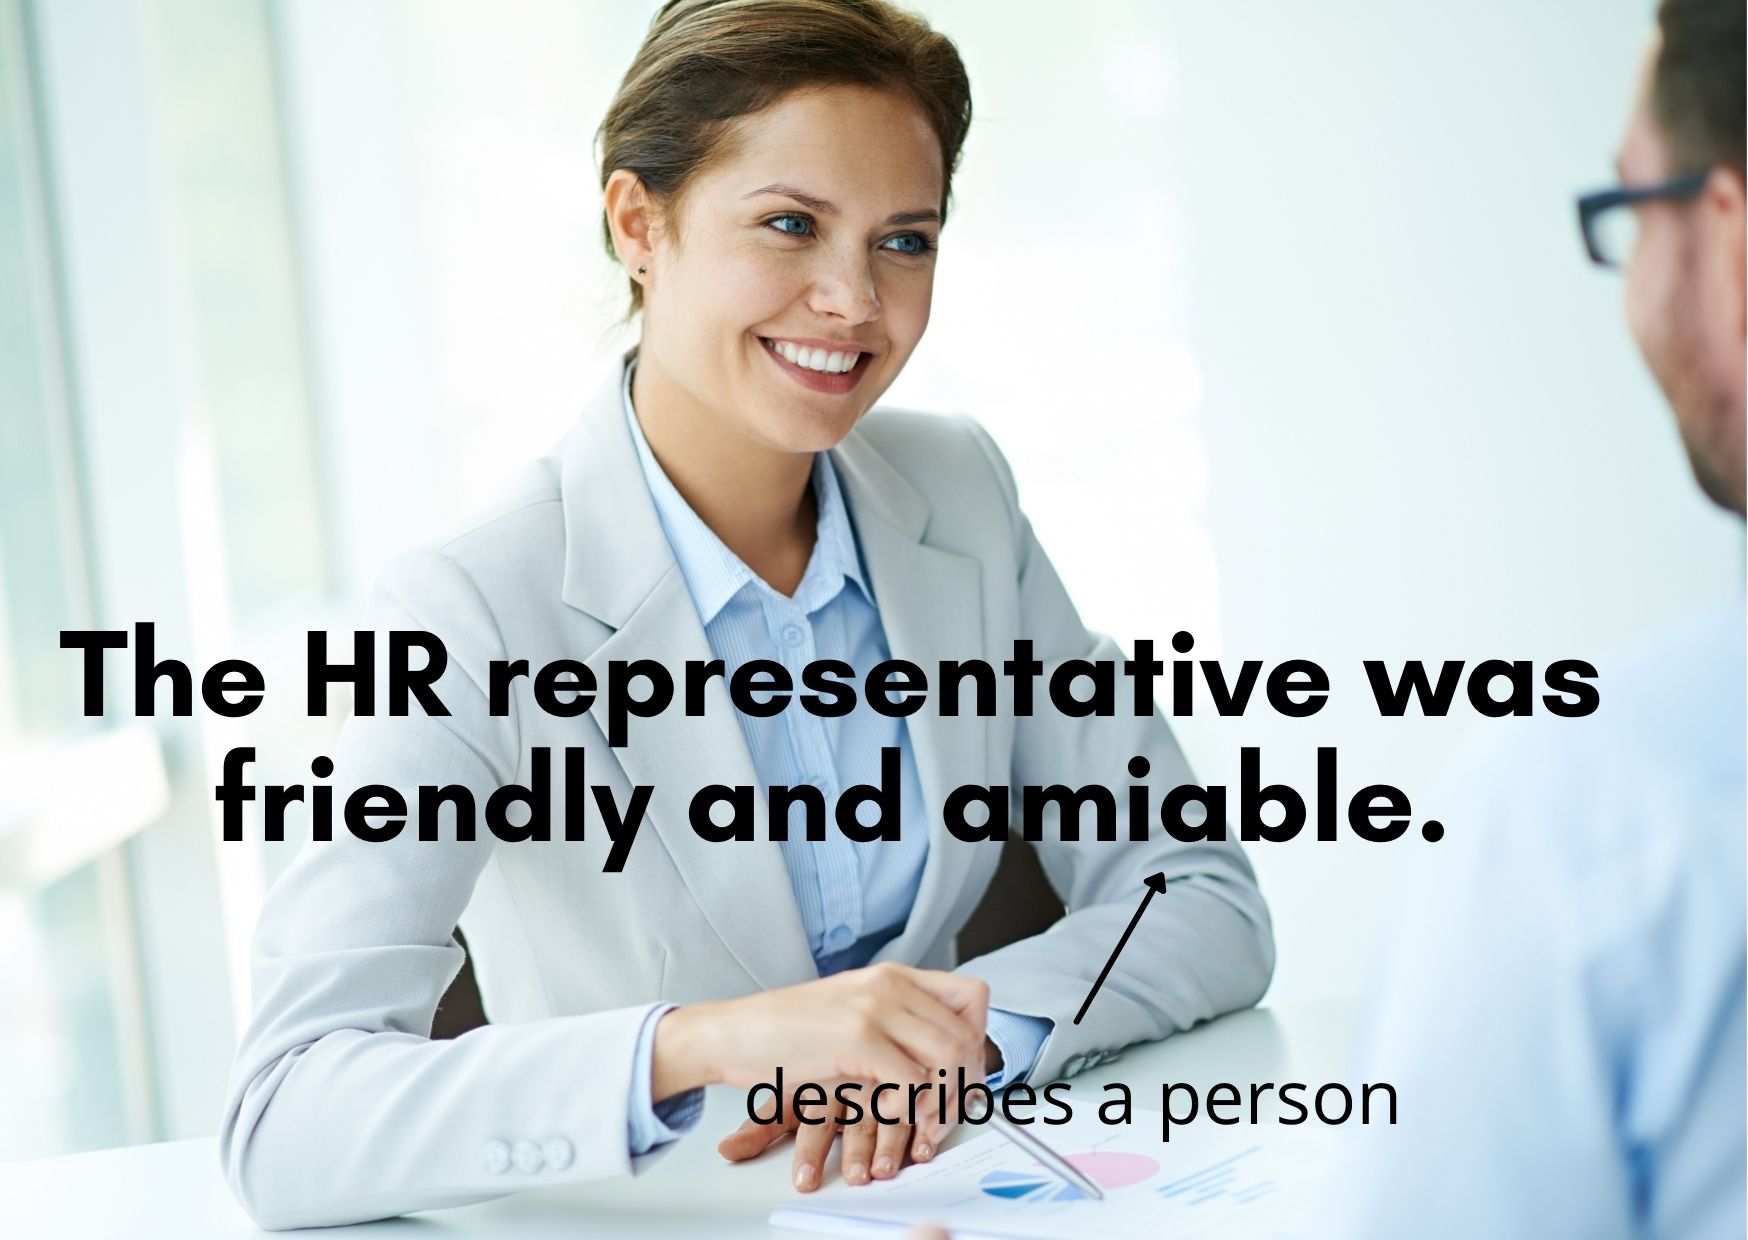 Graphic showing the definition of amiable: The Hr representative was friendly and amiable